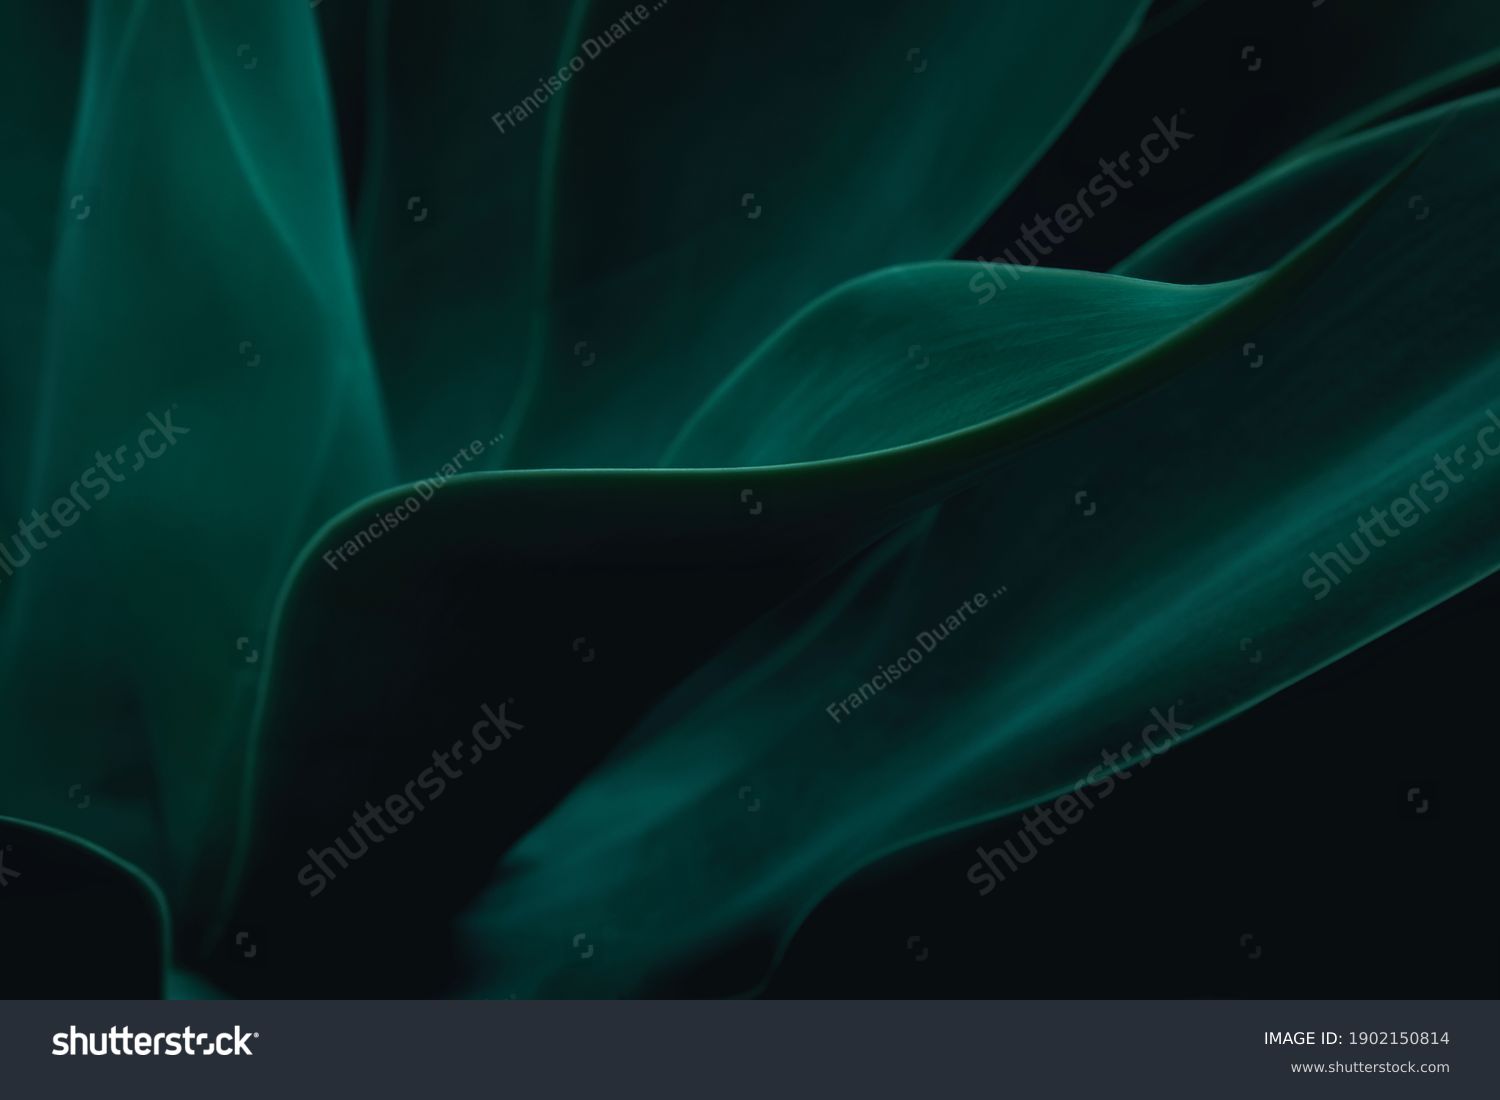 Cactus plant Agave attenuata soft details texture. Natural abstract, delicate and fluid shapes lines. Highlight for a focused leaf edges and blurred background. Colored dark green. Dark moody feel.   #1902150814